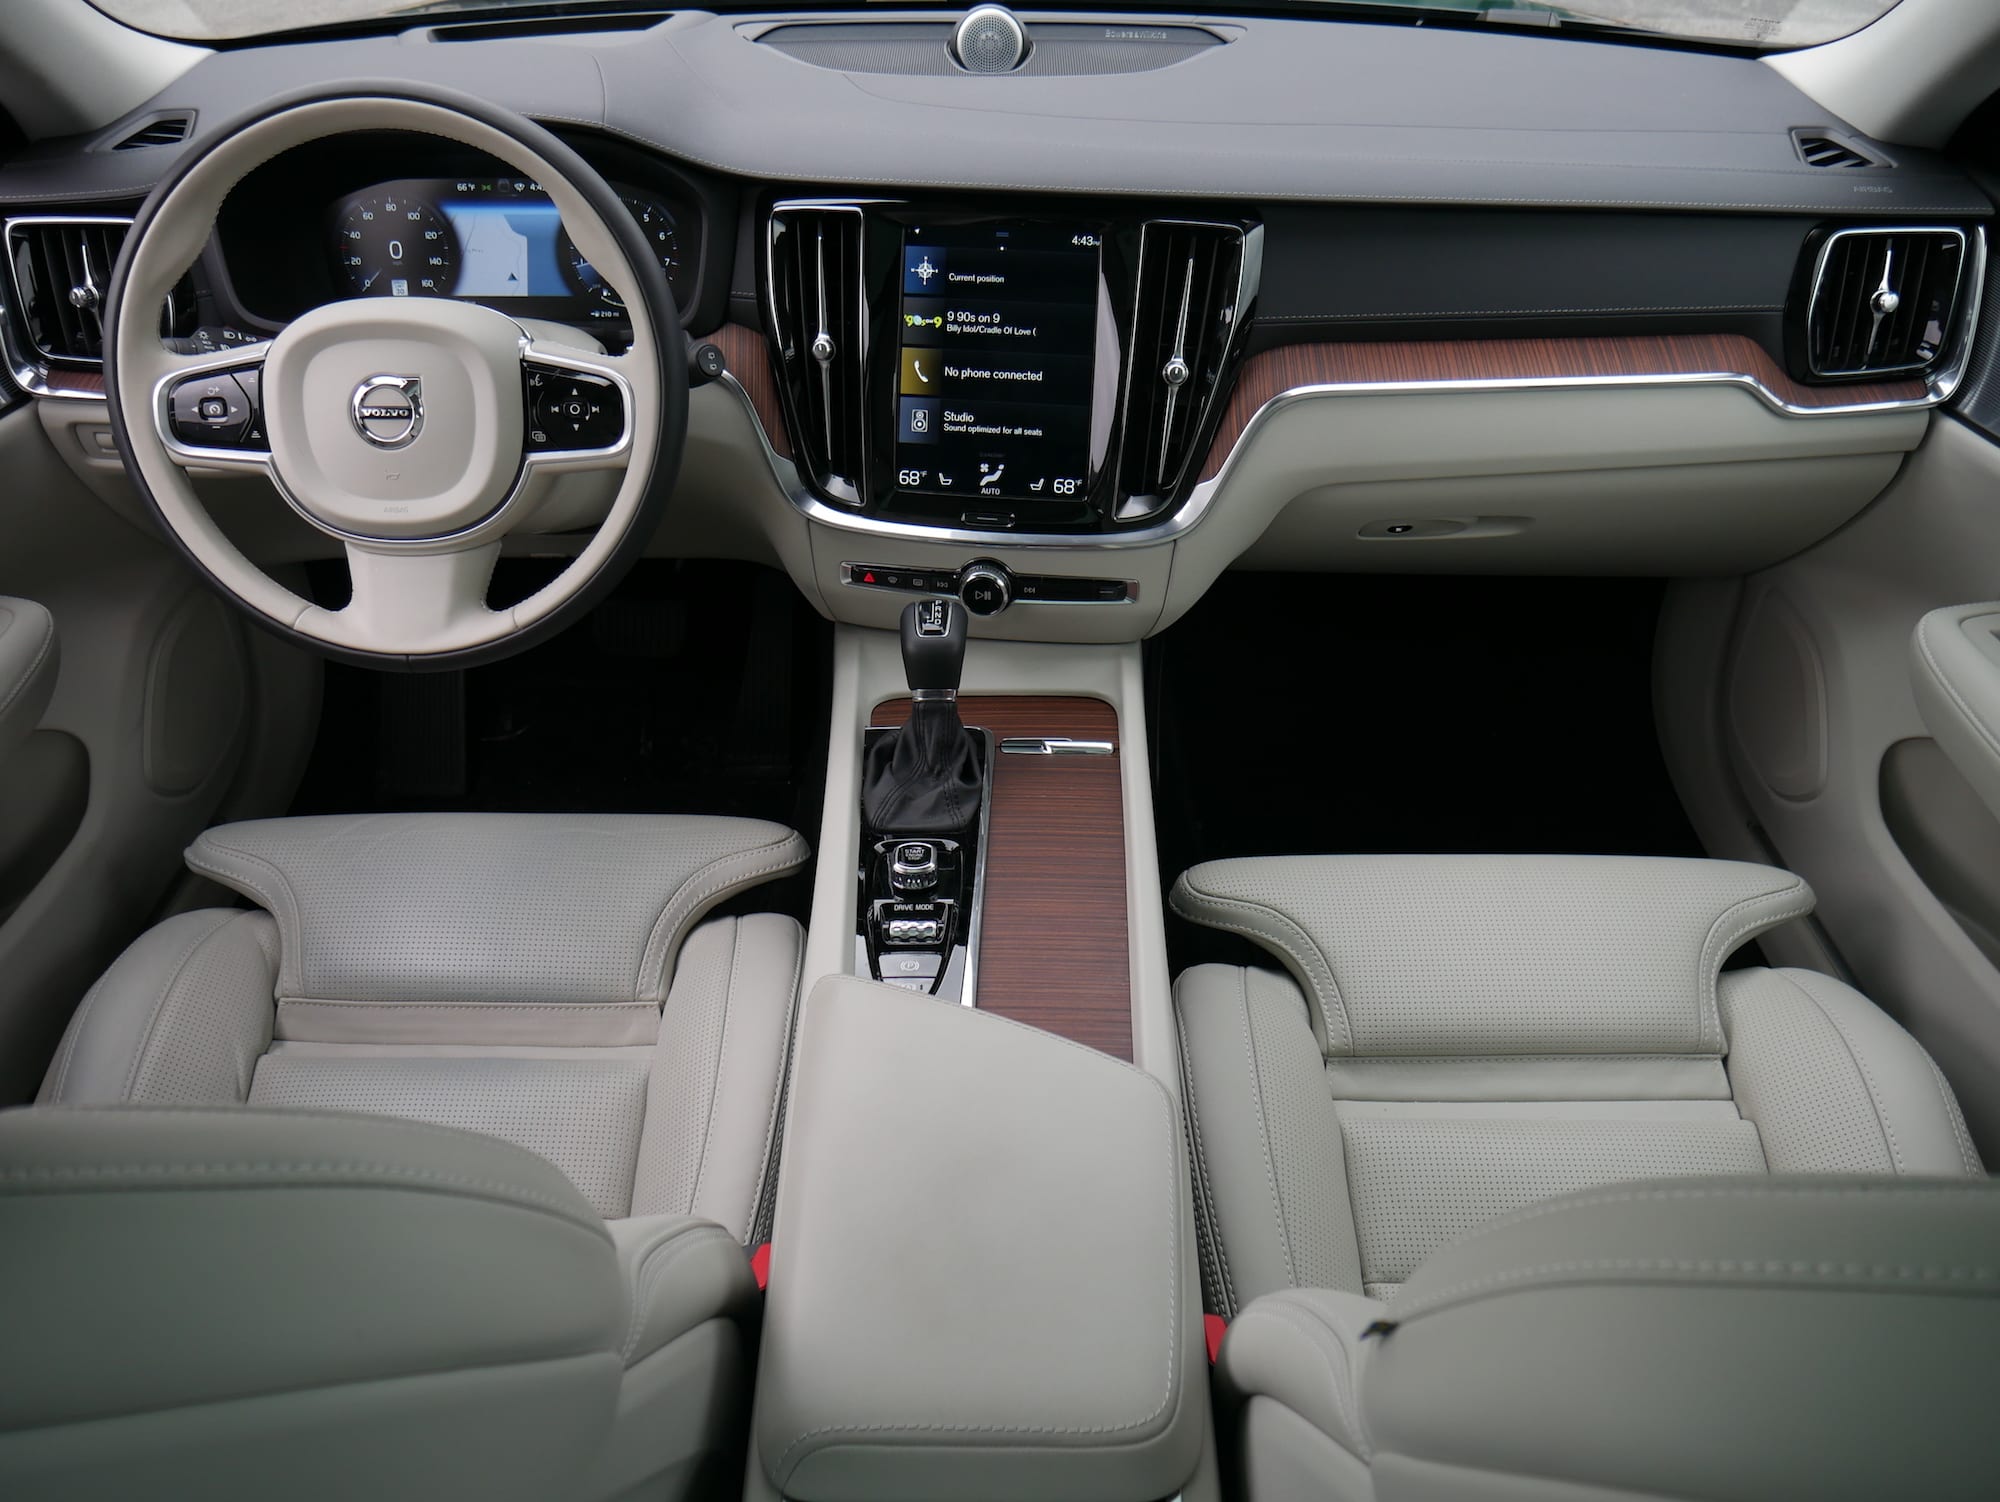 2019 Volvo V60 T6 Inscription cabin view from the back seat